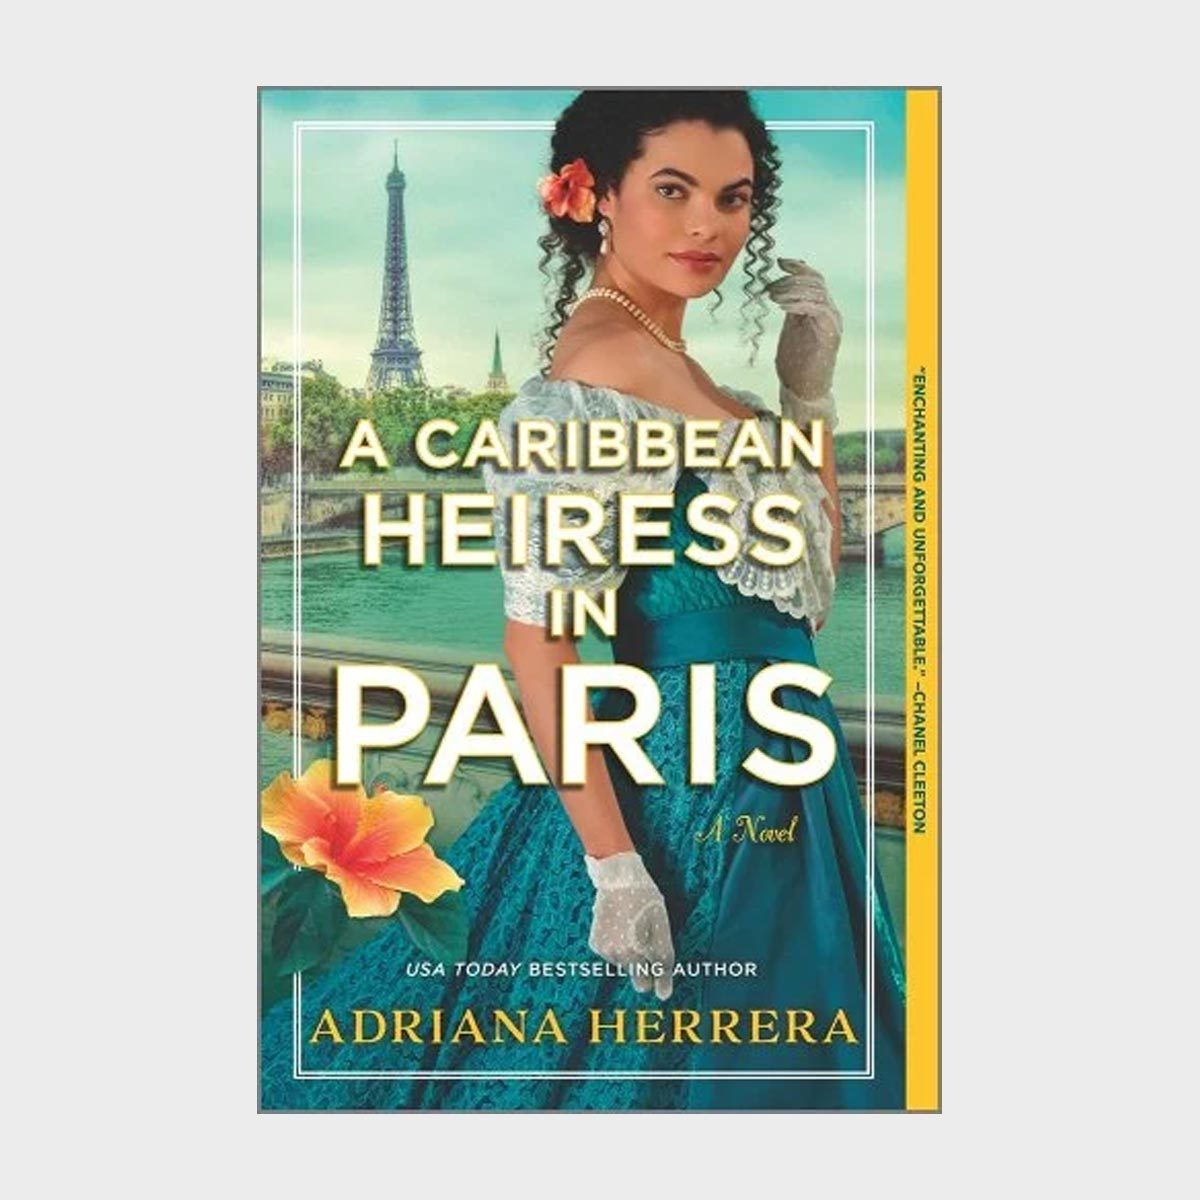 <p class=""><strong>Series starter: </strong><a href="https://bookshop.org/p/books/a-caribbean-heiress-in-paris-a-historical-romance-adriana-herrera/17426787" rel="noopener noreferrer"><em>A Caribbean Heiress in Paris </em></a></p> <p class=""><strong>What you're in for: </strong>A fun and flirty historical romance</p> <p>Get ready for Dominican heroines and squee-worthy antics set in the Victorian era. Adriana Herrera's first novel in this <a href="https://www.rd.com/list/best-book-series/" rel="noopener noreferrer">book series</a> was published in 2022, and the third (<em>A Tropical Rebel Gets the Duke</em>) is set to release at the end of this year. In <em>A Caribbean Heiress in Paris, </em>Luz Alana Heith-Benzan learns that she won't have access to her trust fund until after she marries, but Luz isn't in any rush to tie the knot. Her ultimate goal is to expand the family's rum business. But a constant slew of rejections from men who don't want to do business with a woman of color proves to be a challenge, and a marriage of convenience to James Evanston Sinclair, the Earl of Darnick, may be the only way to meet both parties' needs.</p> <p class="listicle-page__cta-button-shop"><a class="shop-btn" href="https://bookshop.org/p/books/a-caribbean-heiress-in-paris-a-historical-romance-adriana-herrera/17426787">Shop Now</a></p>